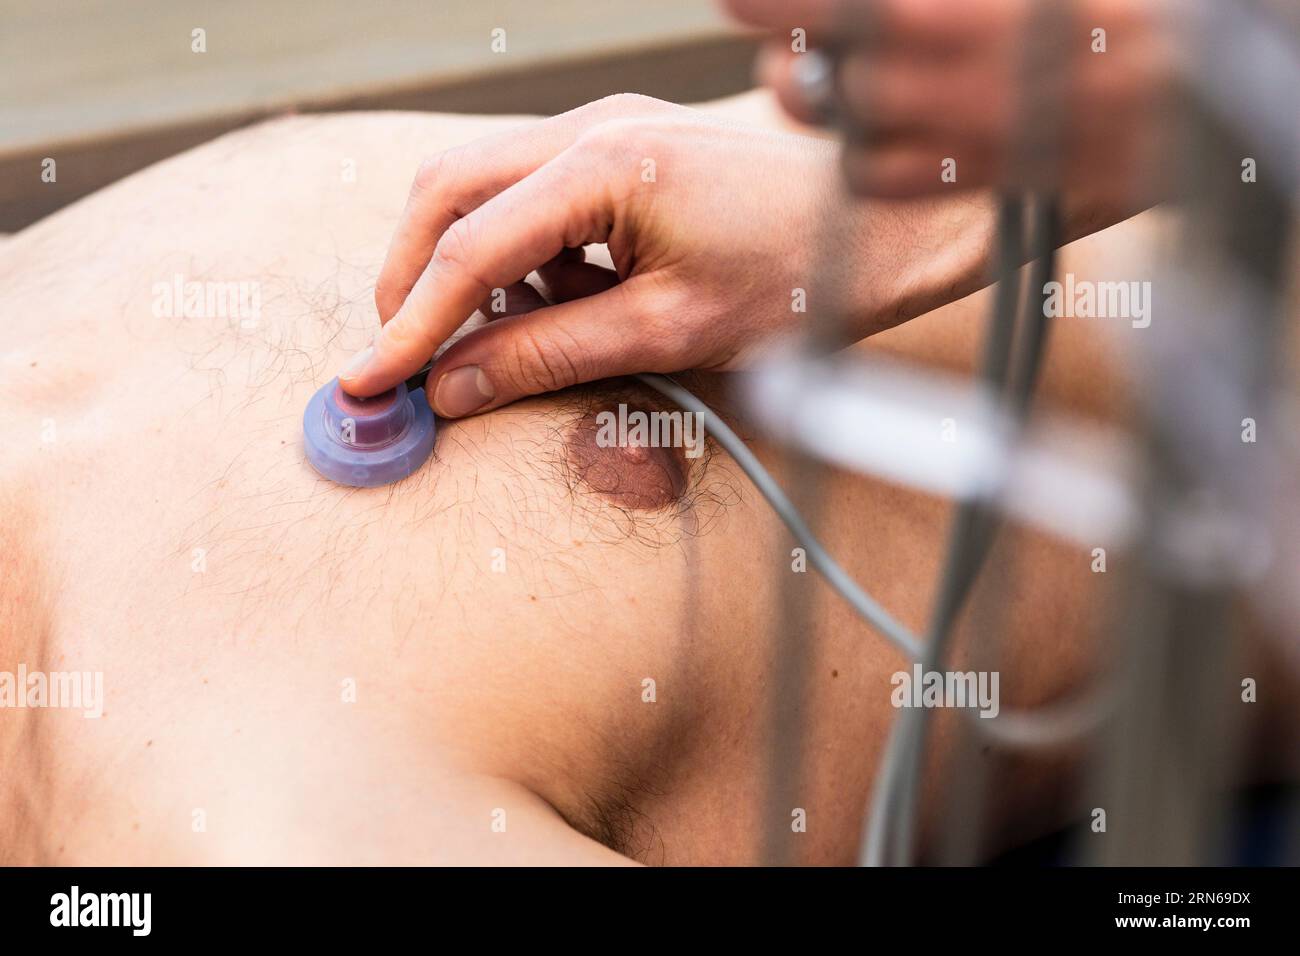 ECG examination by a doctor, application of an electrode Stock Photo